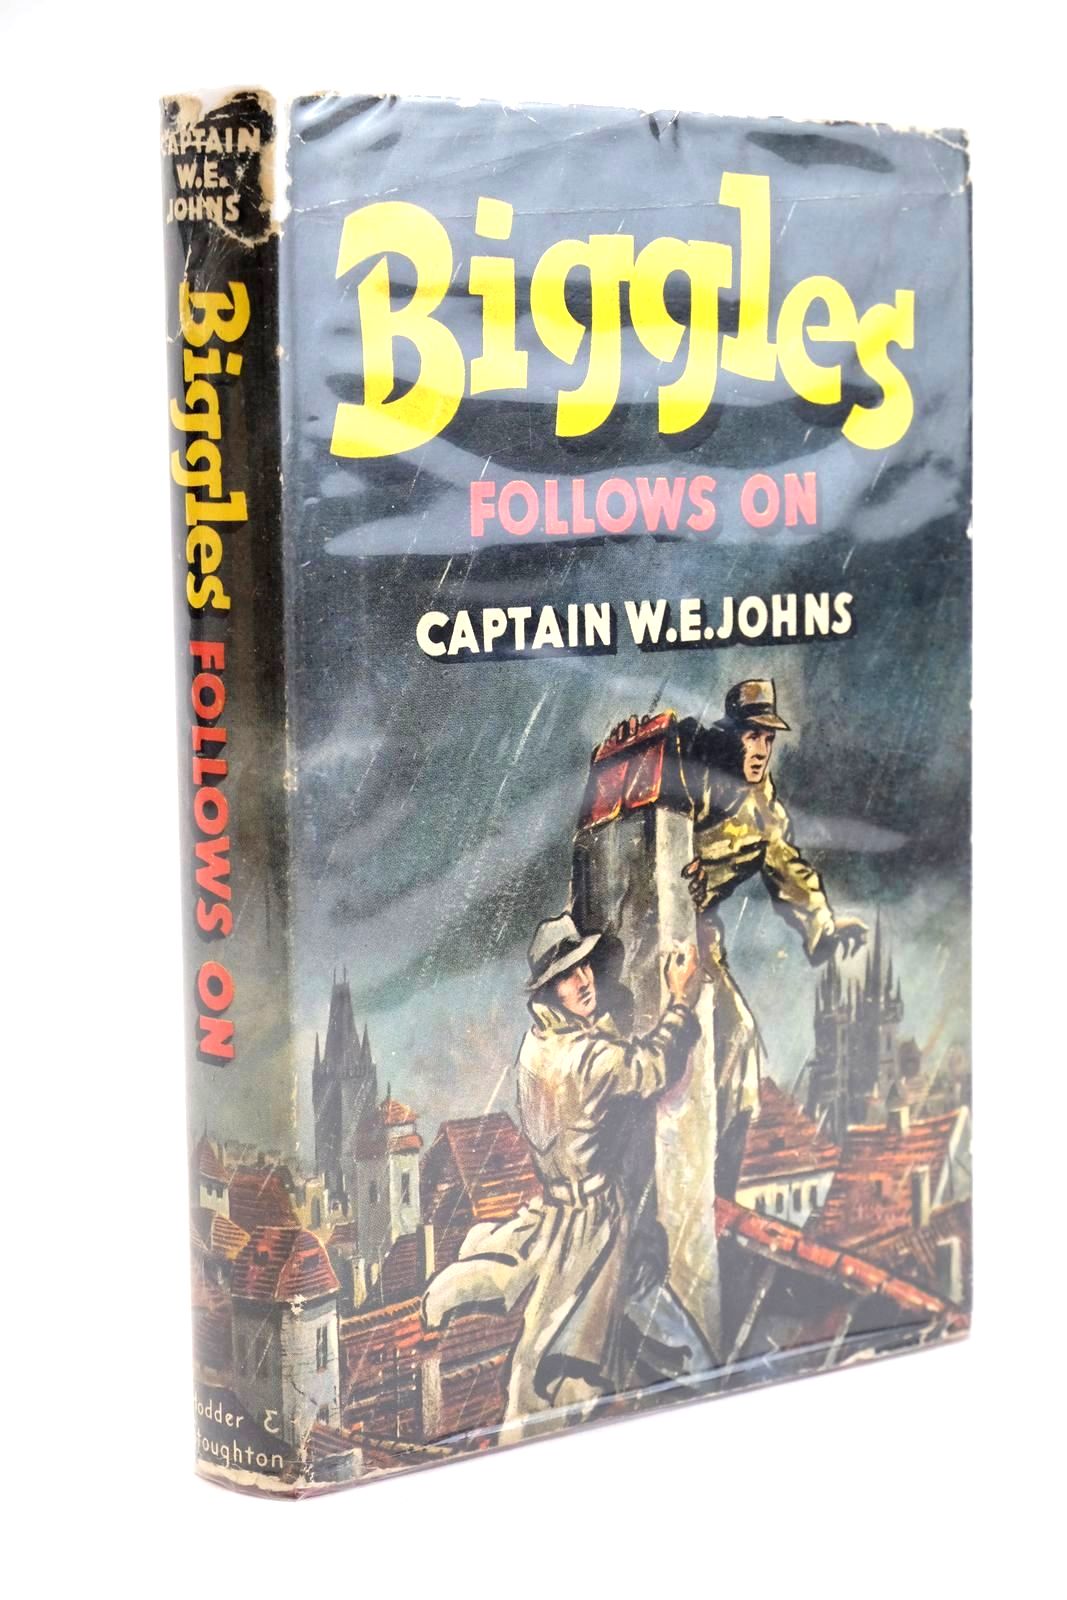 Photo of BIGGLES FOLLOWS ON written by Johns, W.E. illustrated by Stead, published by Hodder &amp; Stoughton (STOCK CODE: 1323313)  for sale by Stella & Rose's Books